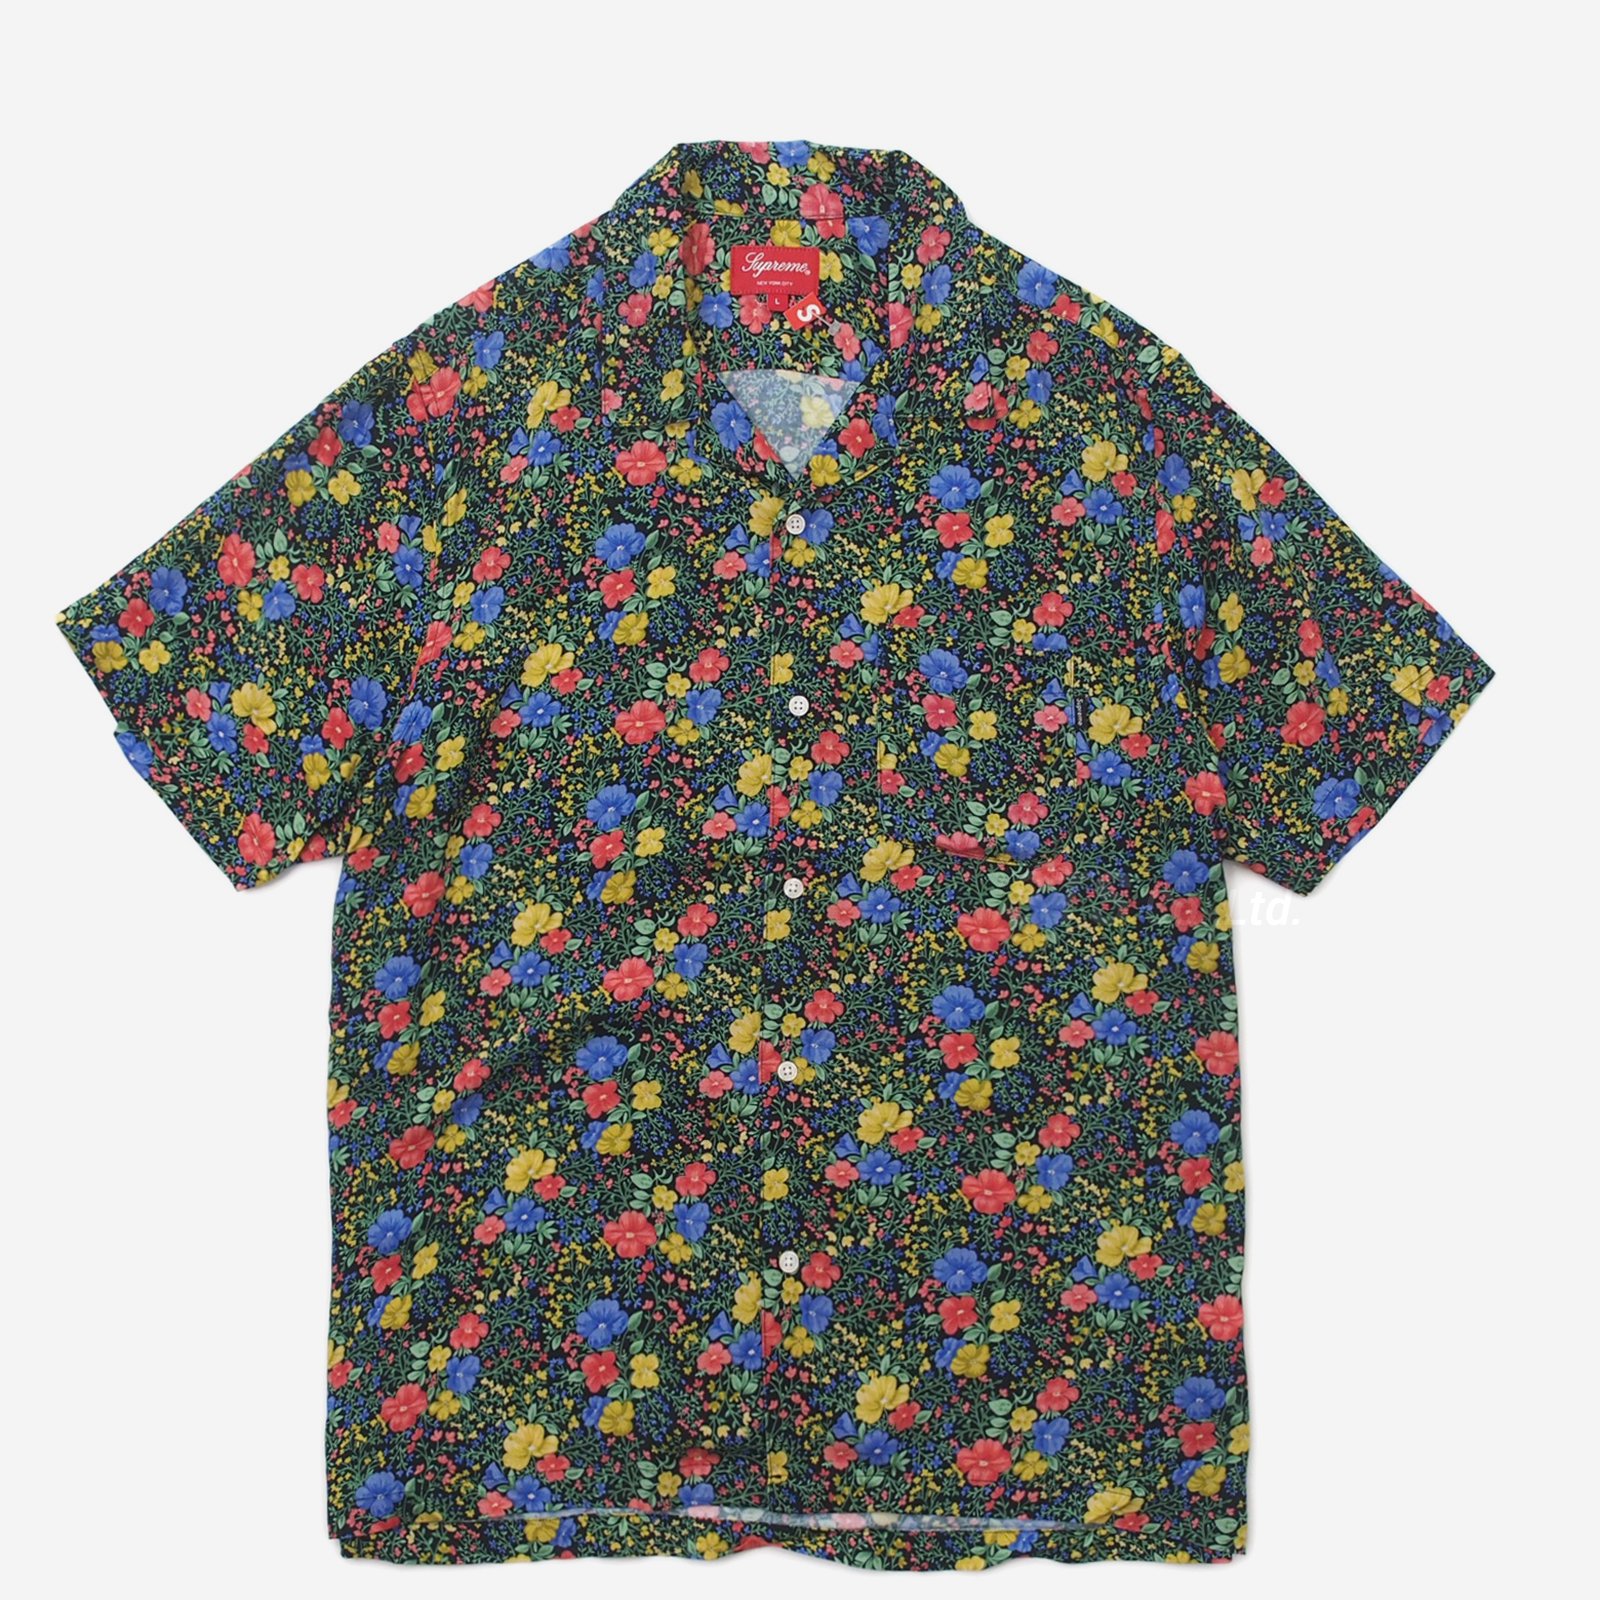 Lsize Mini Floral Rayon S/S Shirt